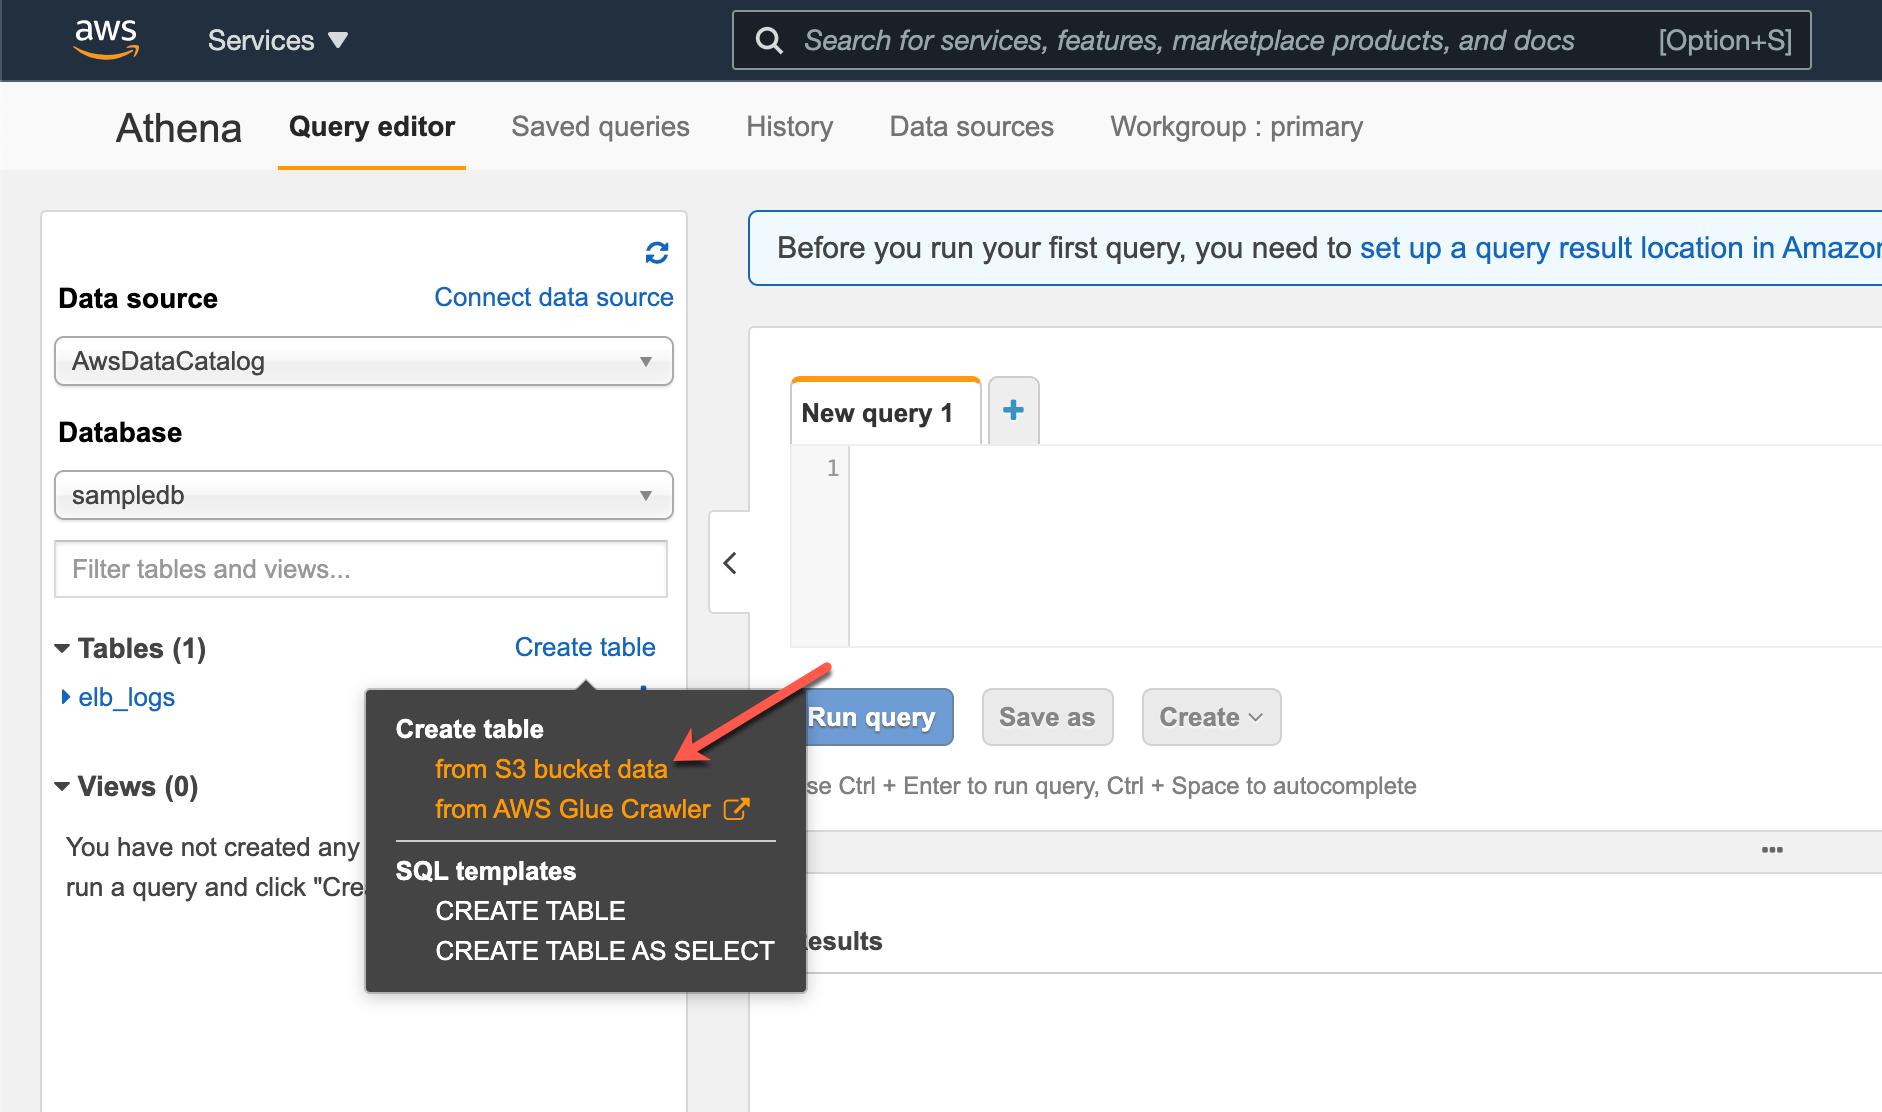 Creating a new table in AWS Athena